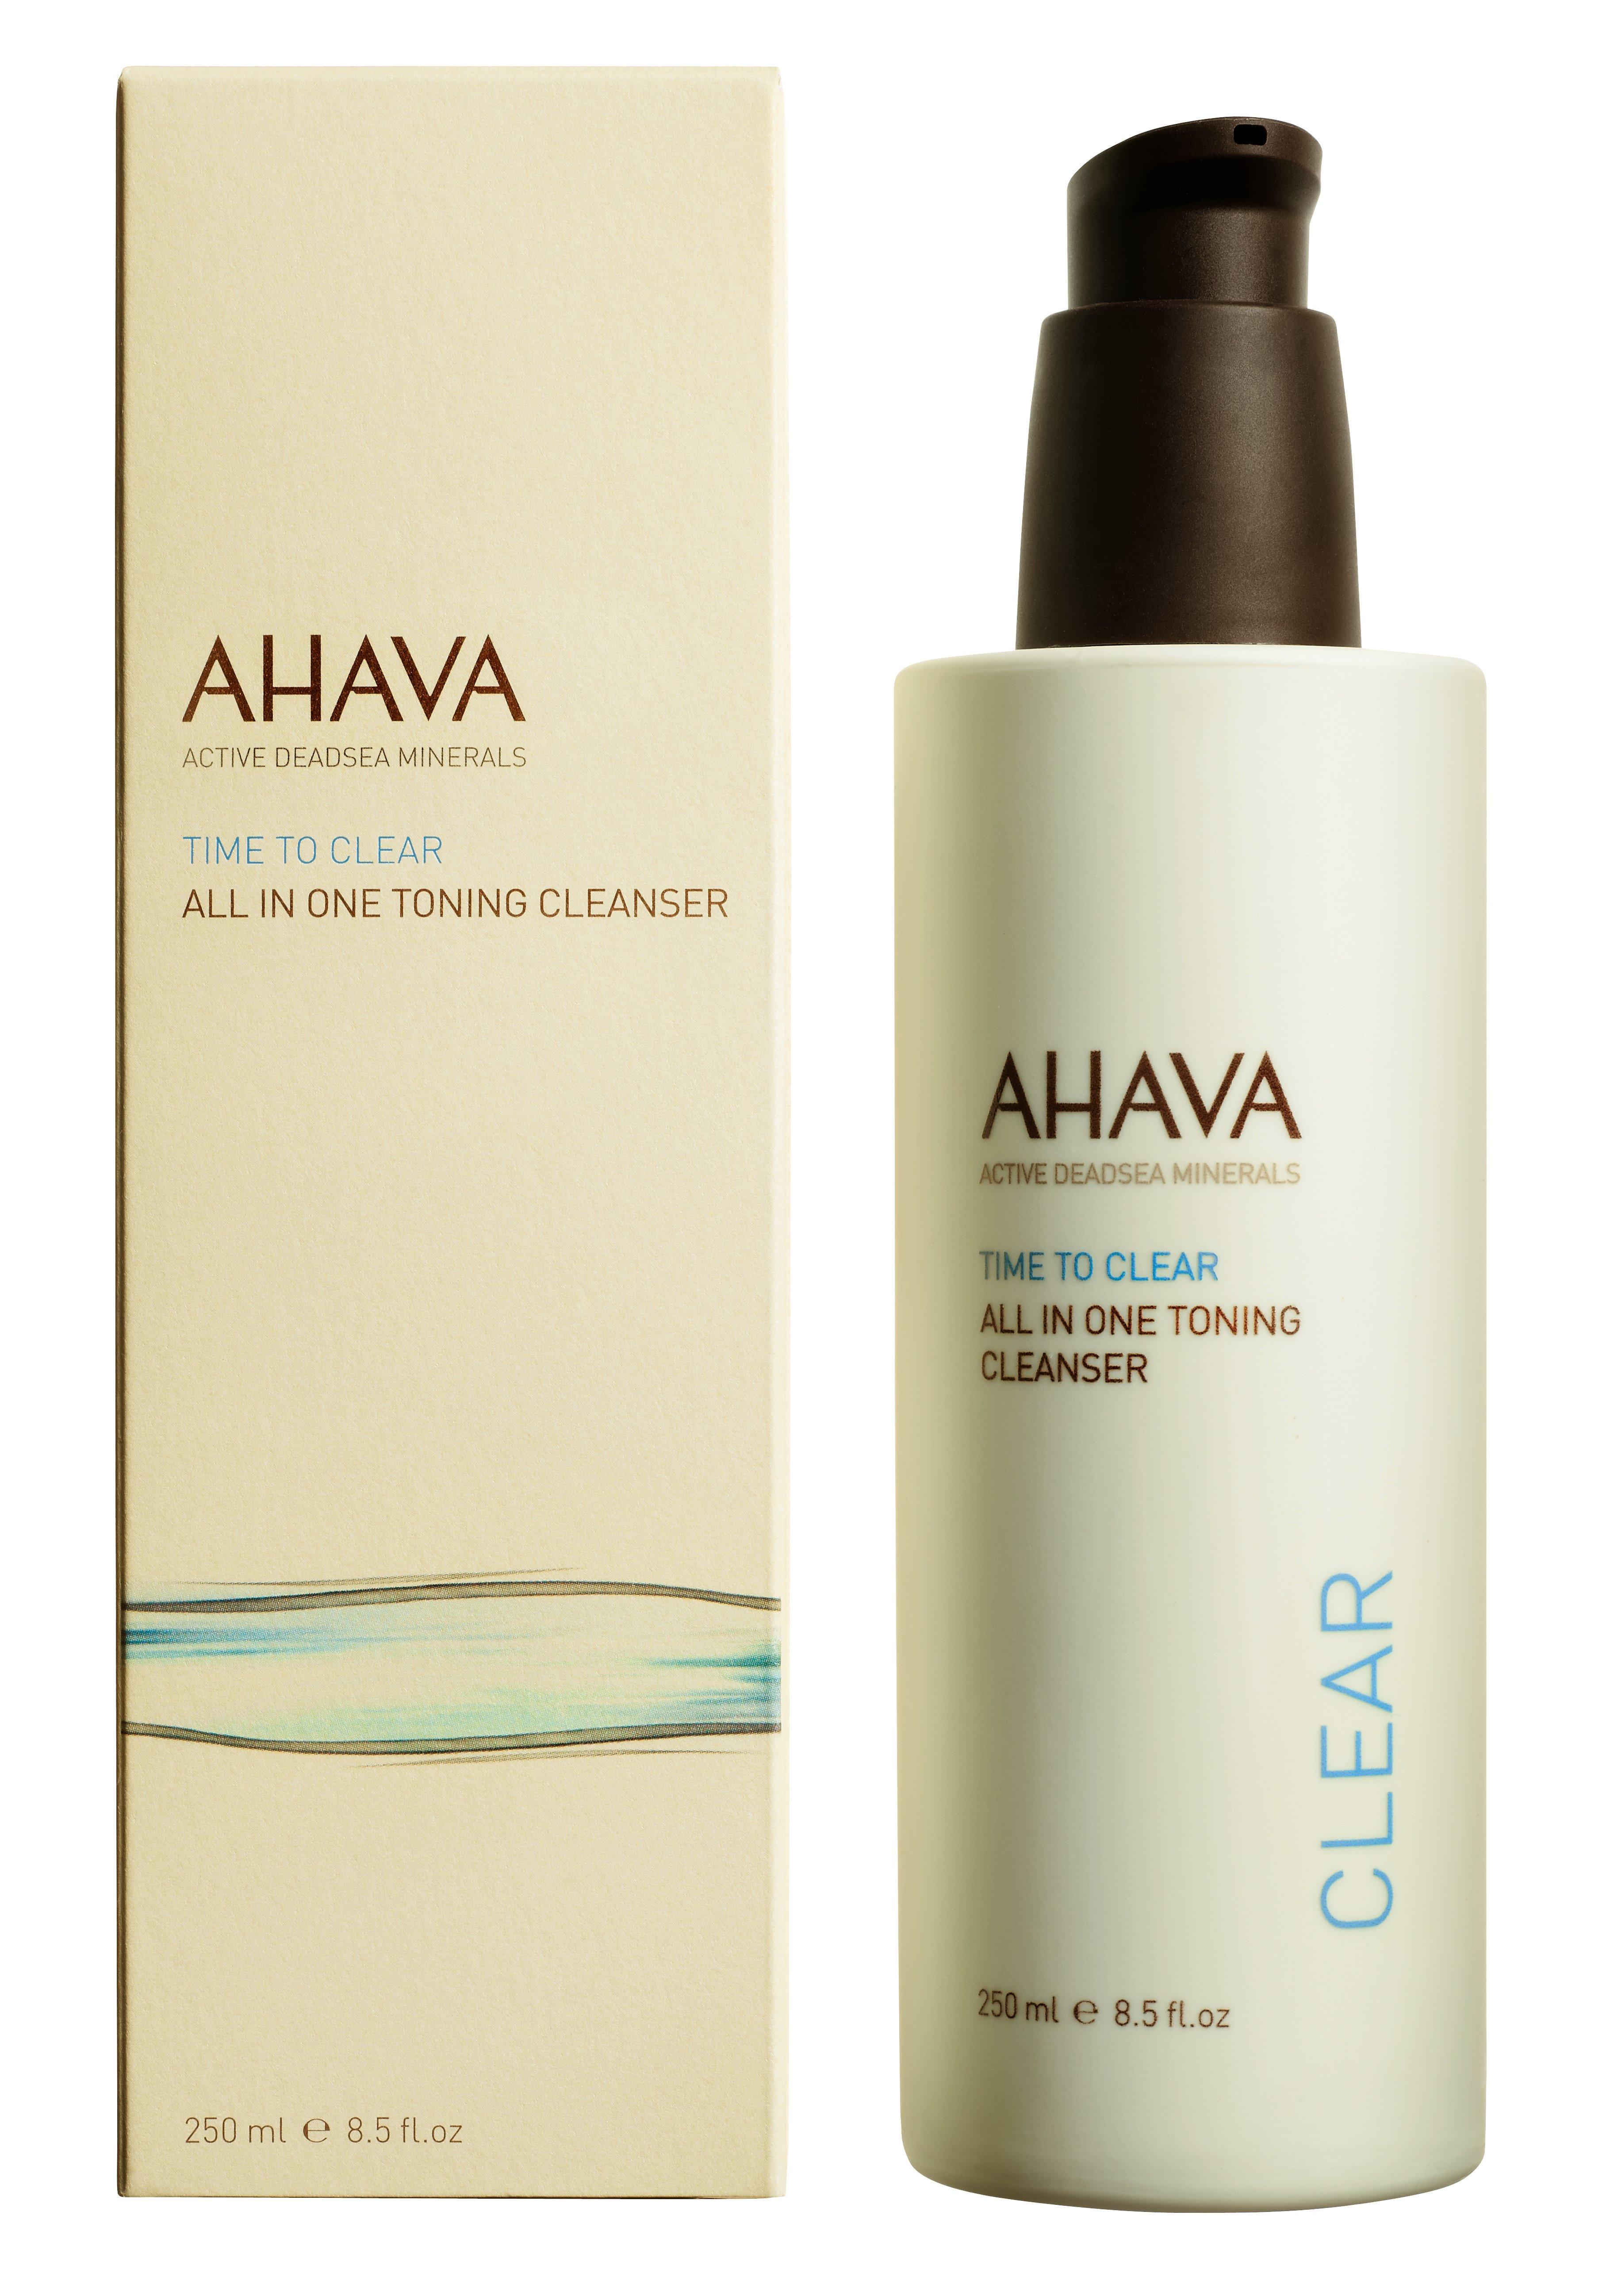 Image of AHAVA All in one Toning Cleanser - 250ml